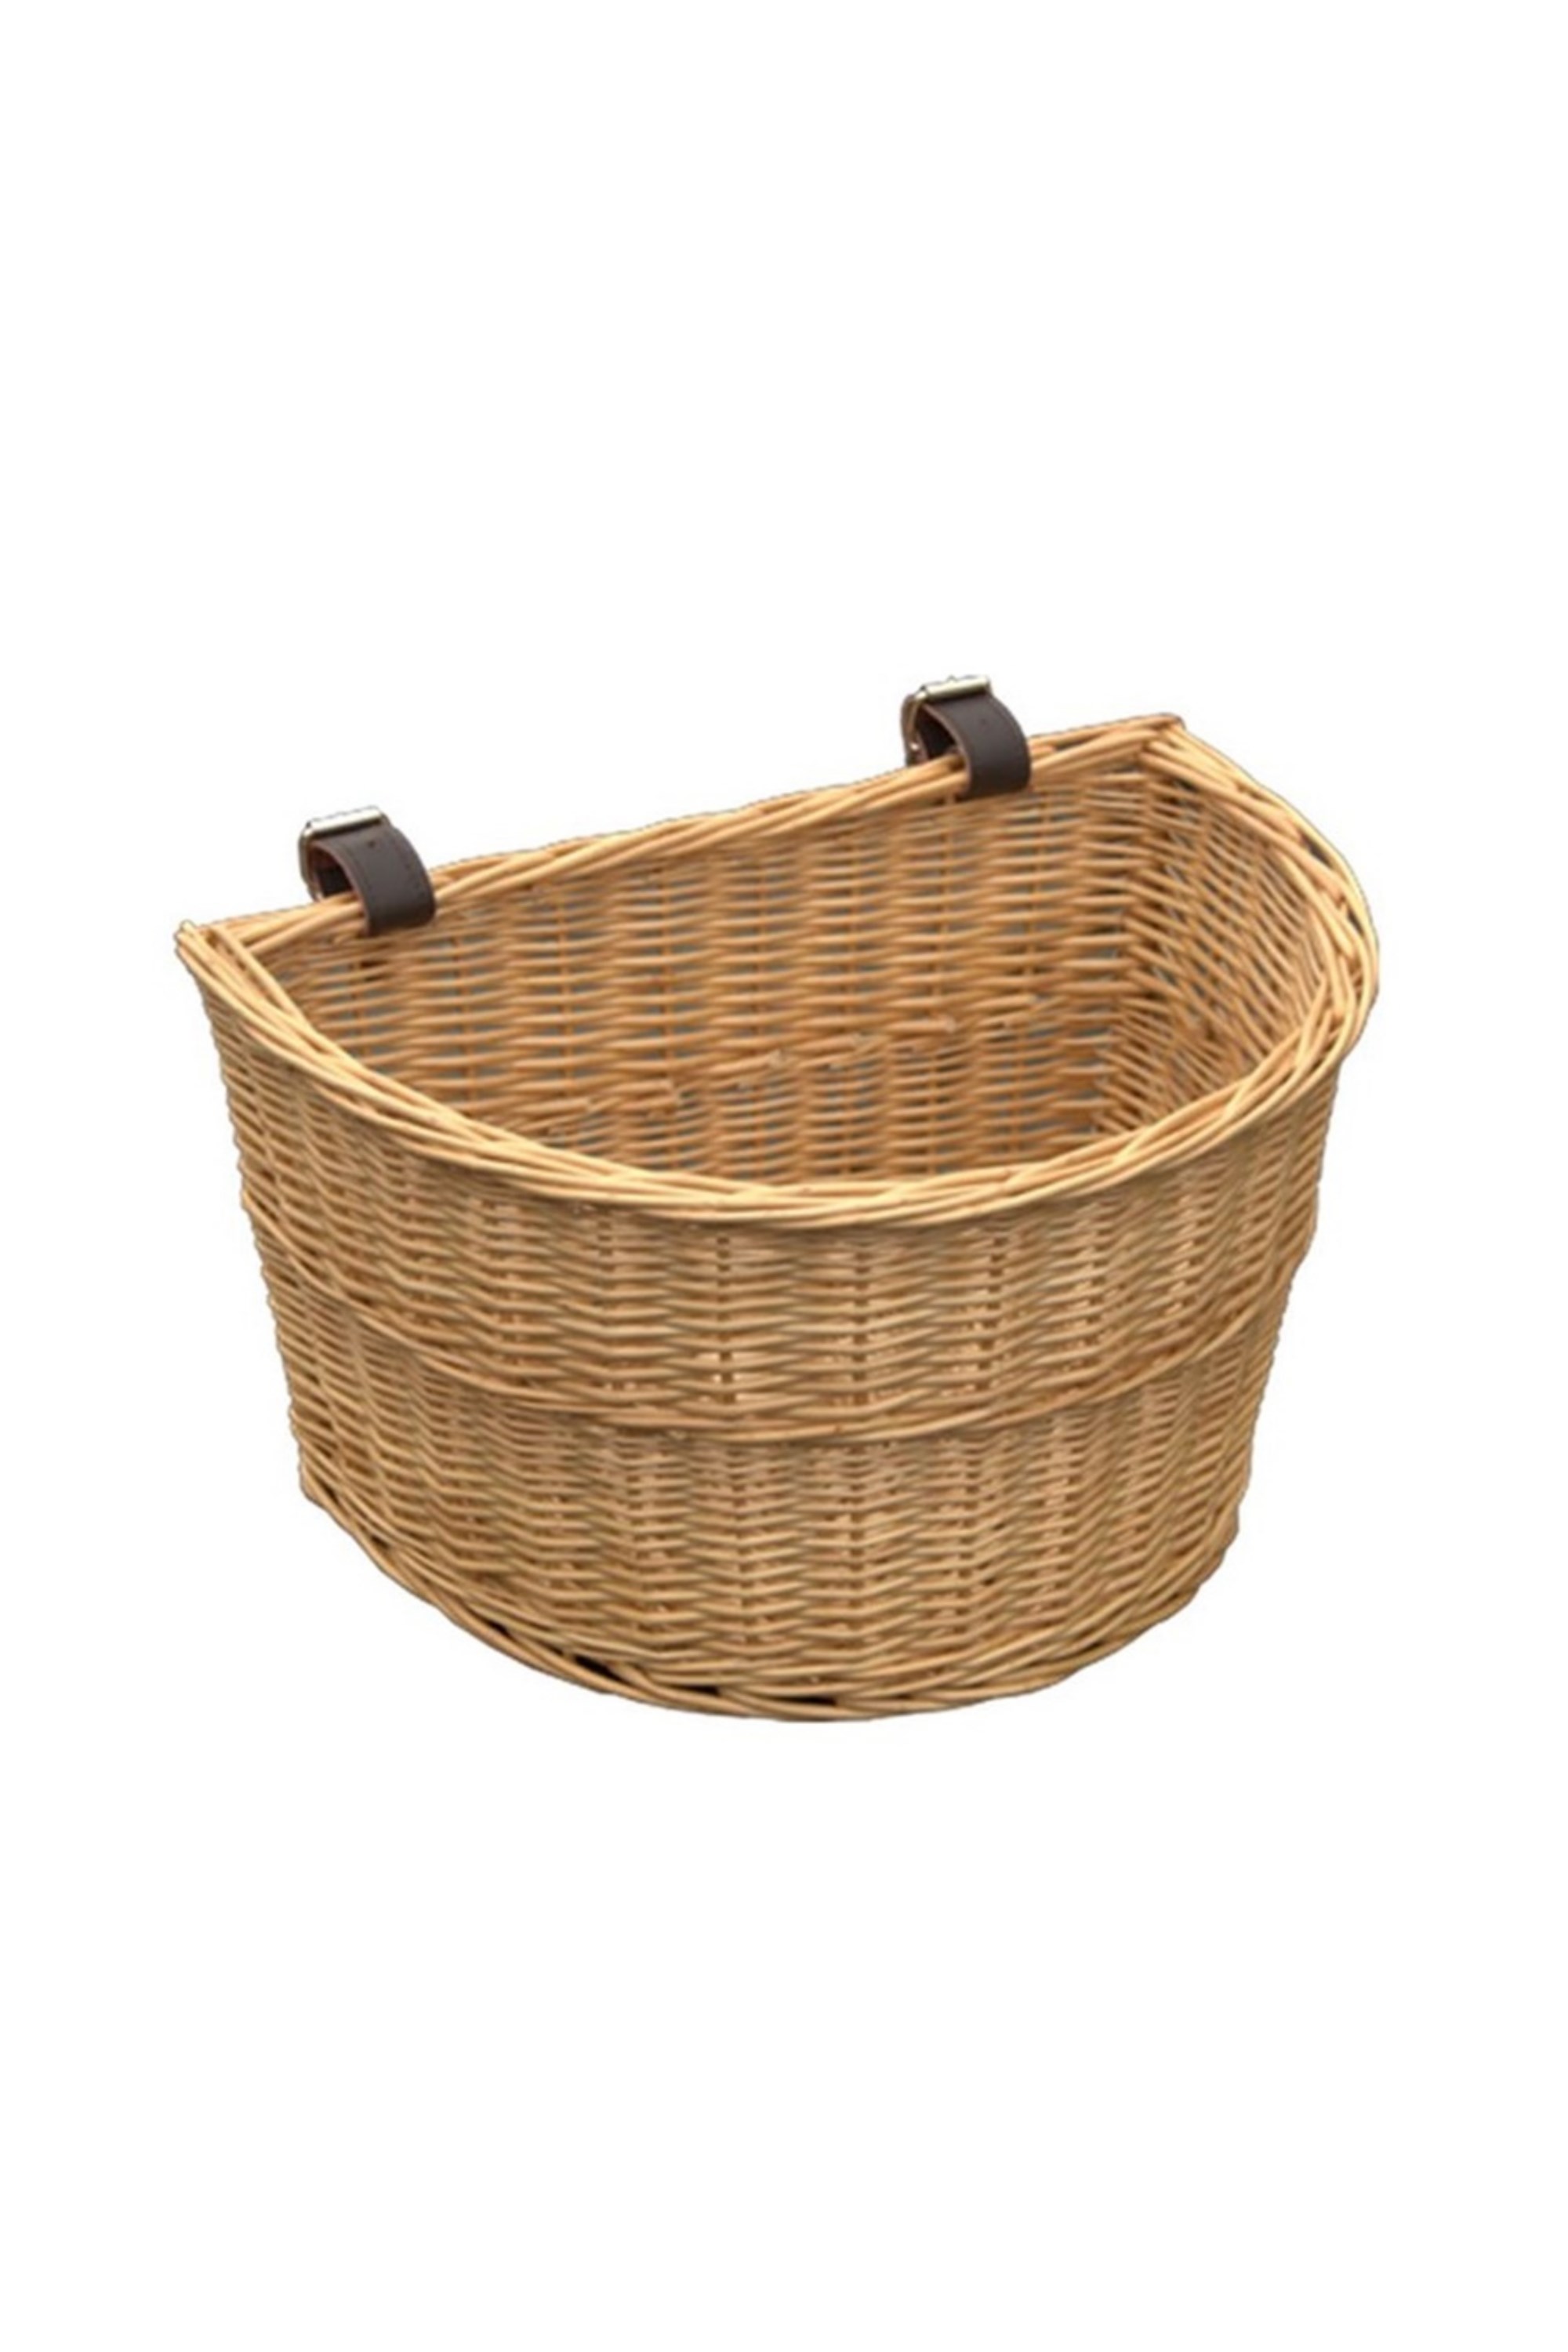 Wicker Willow Cycle Basket -